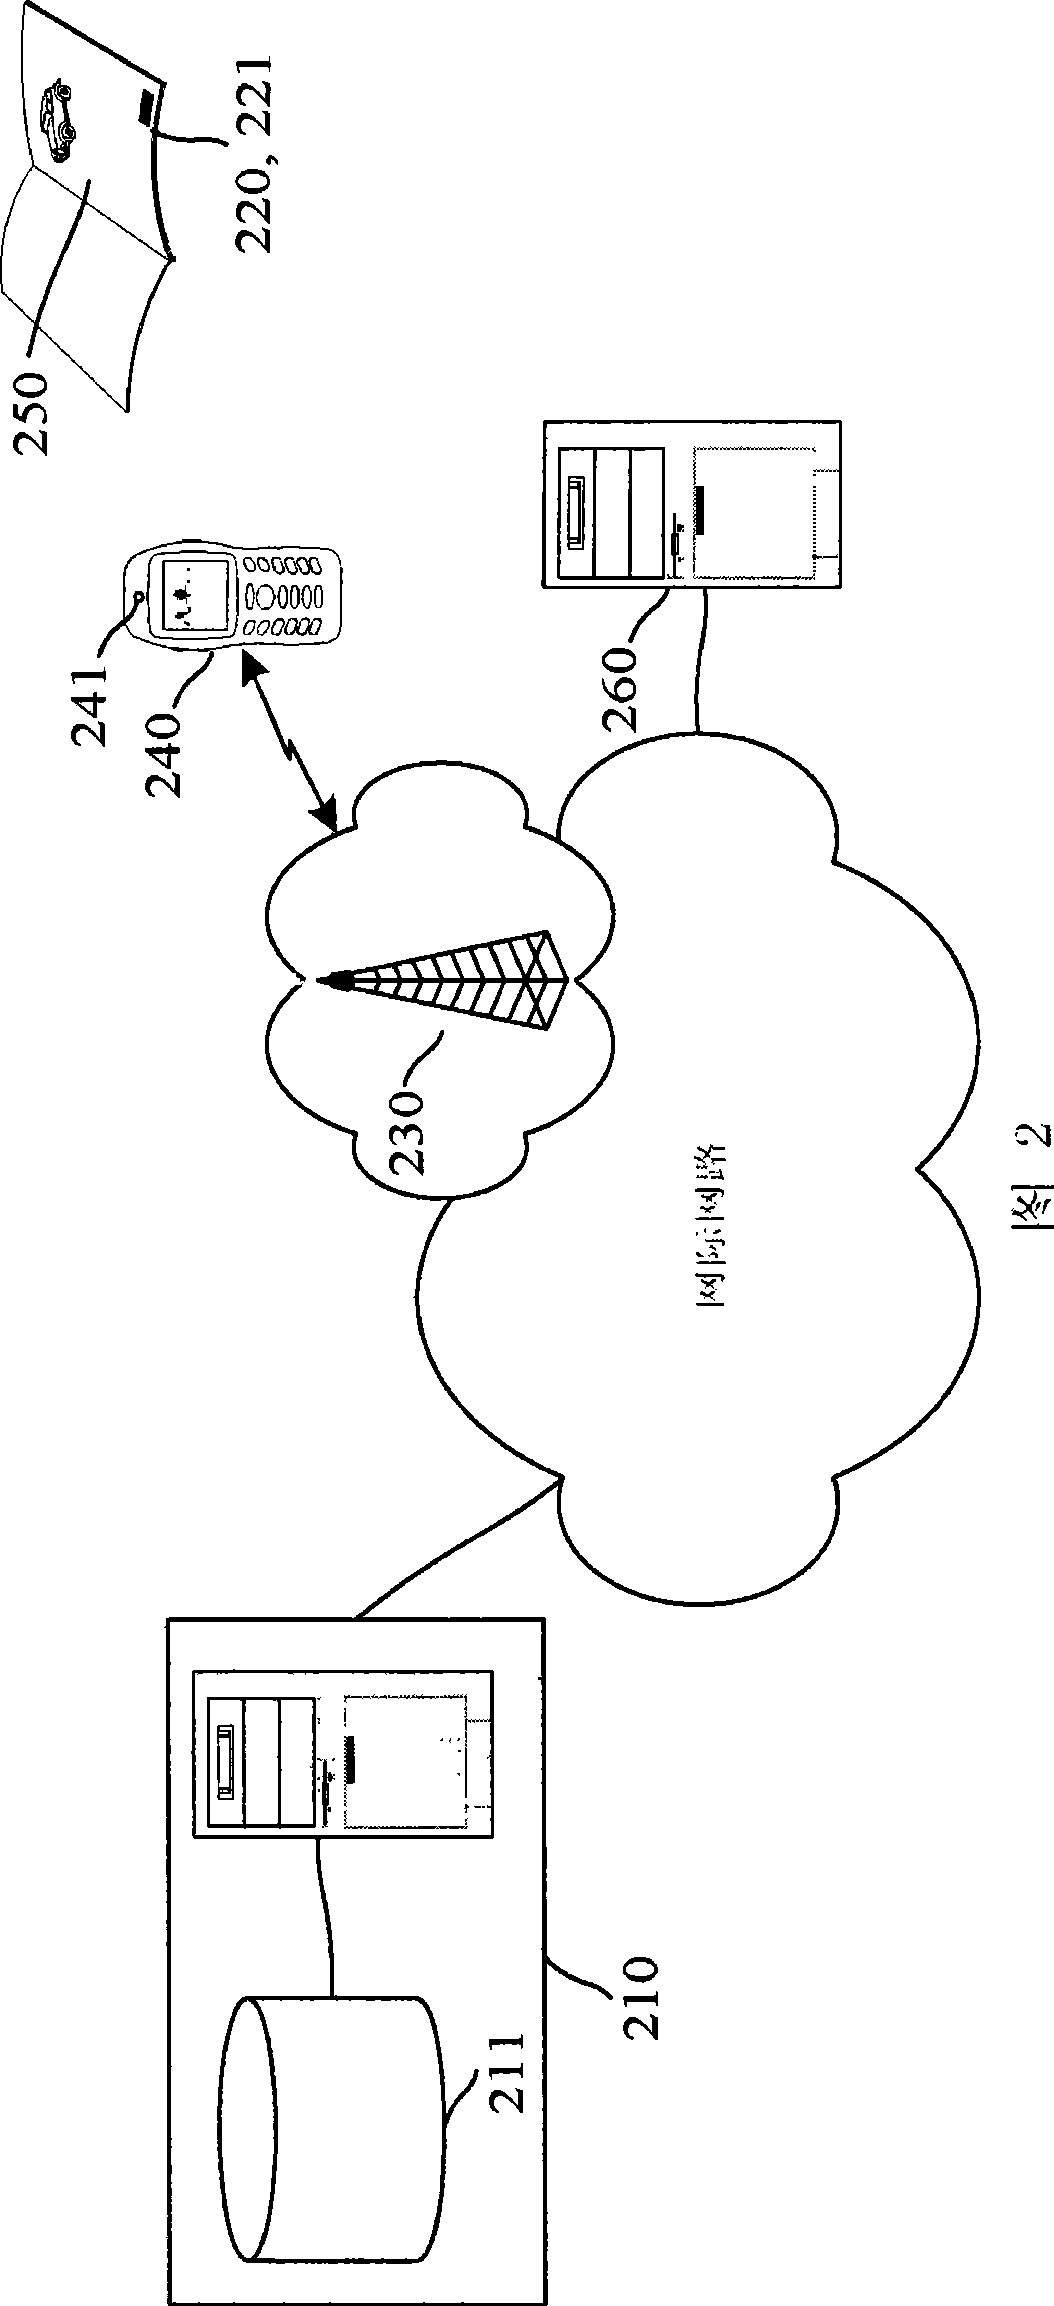 Method for applying general-purpose information code to hand-held radio communication device safety trading